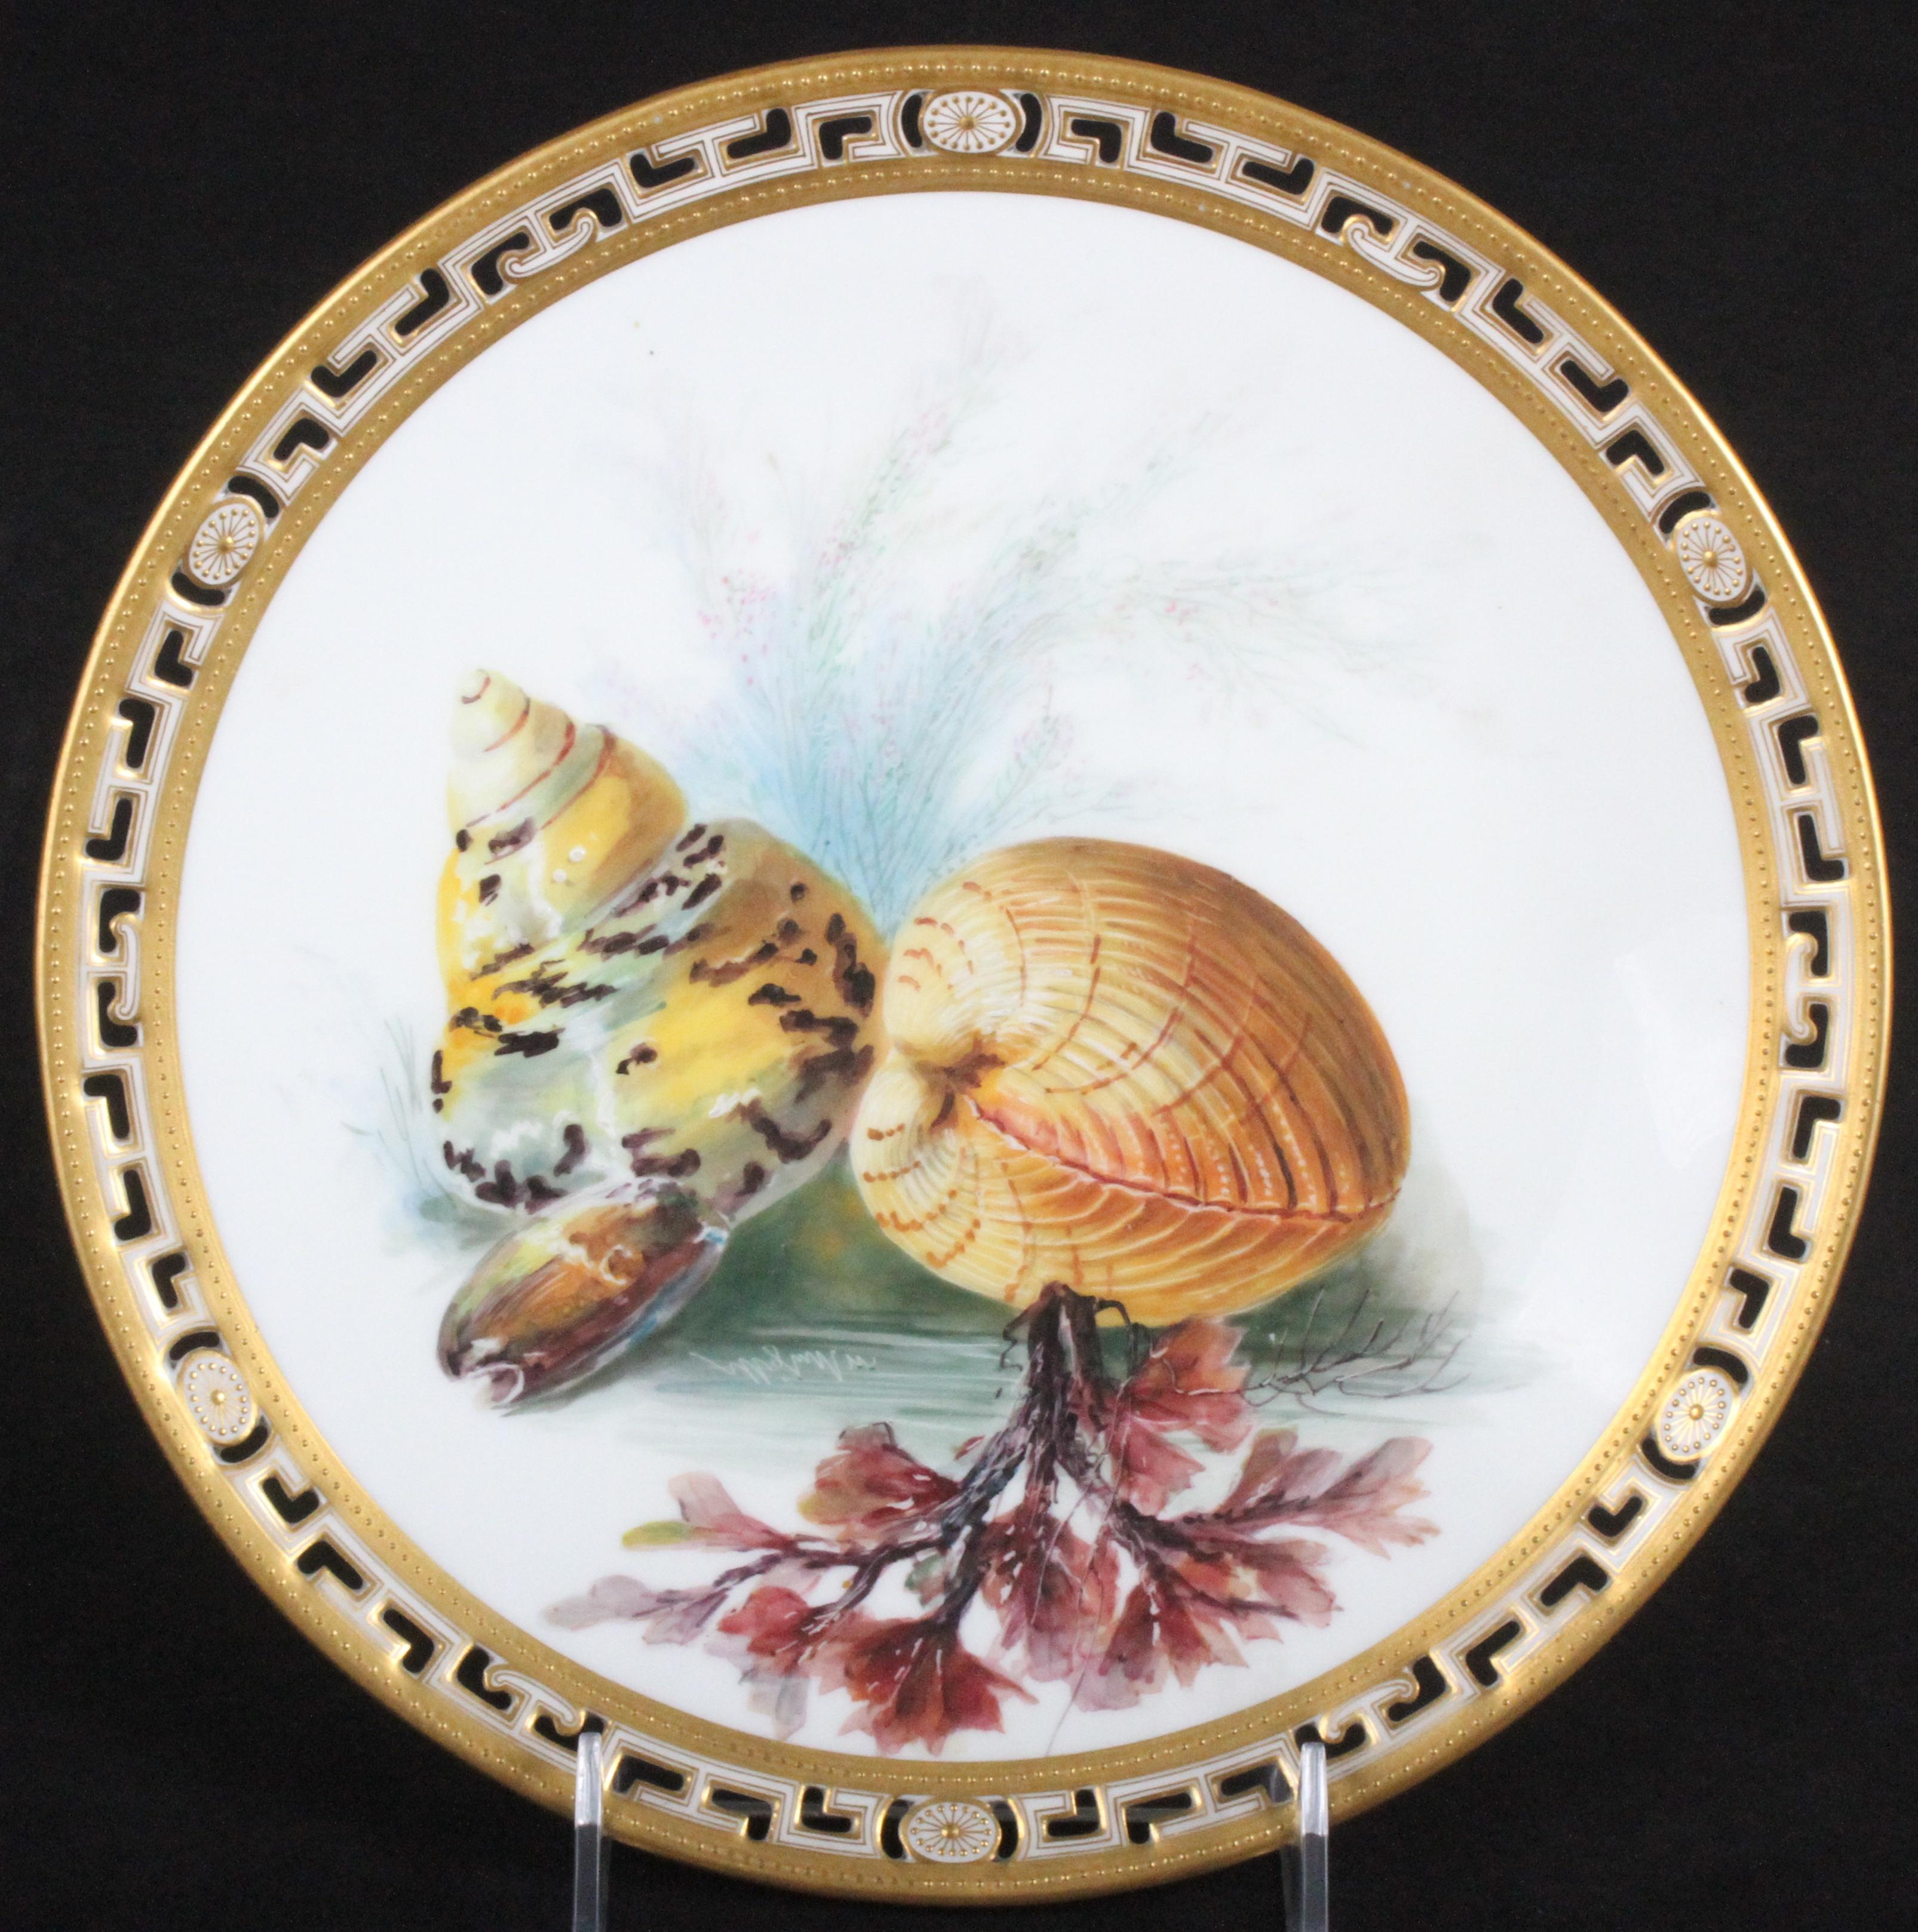 13 Minton Tropical Aquatic Cabinet Plates by Artist William Mussill In Excellent Condition For Sale In New York, NY